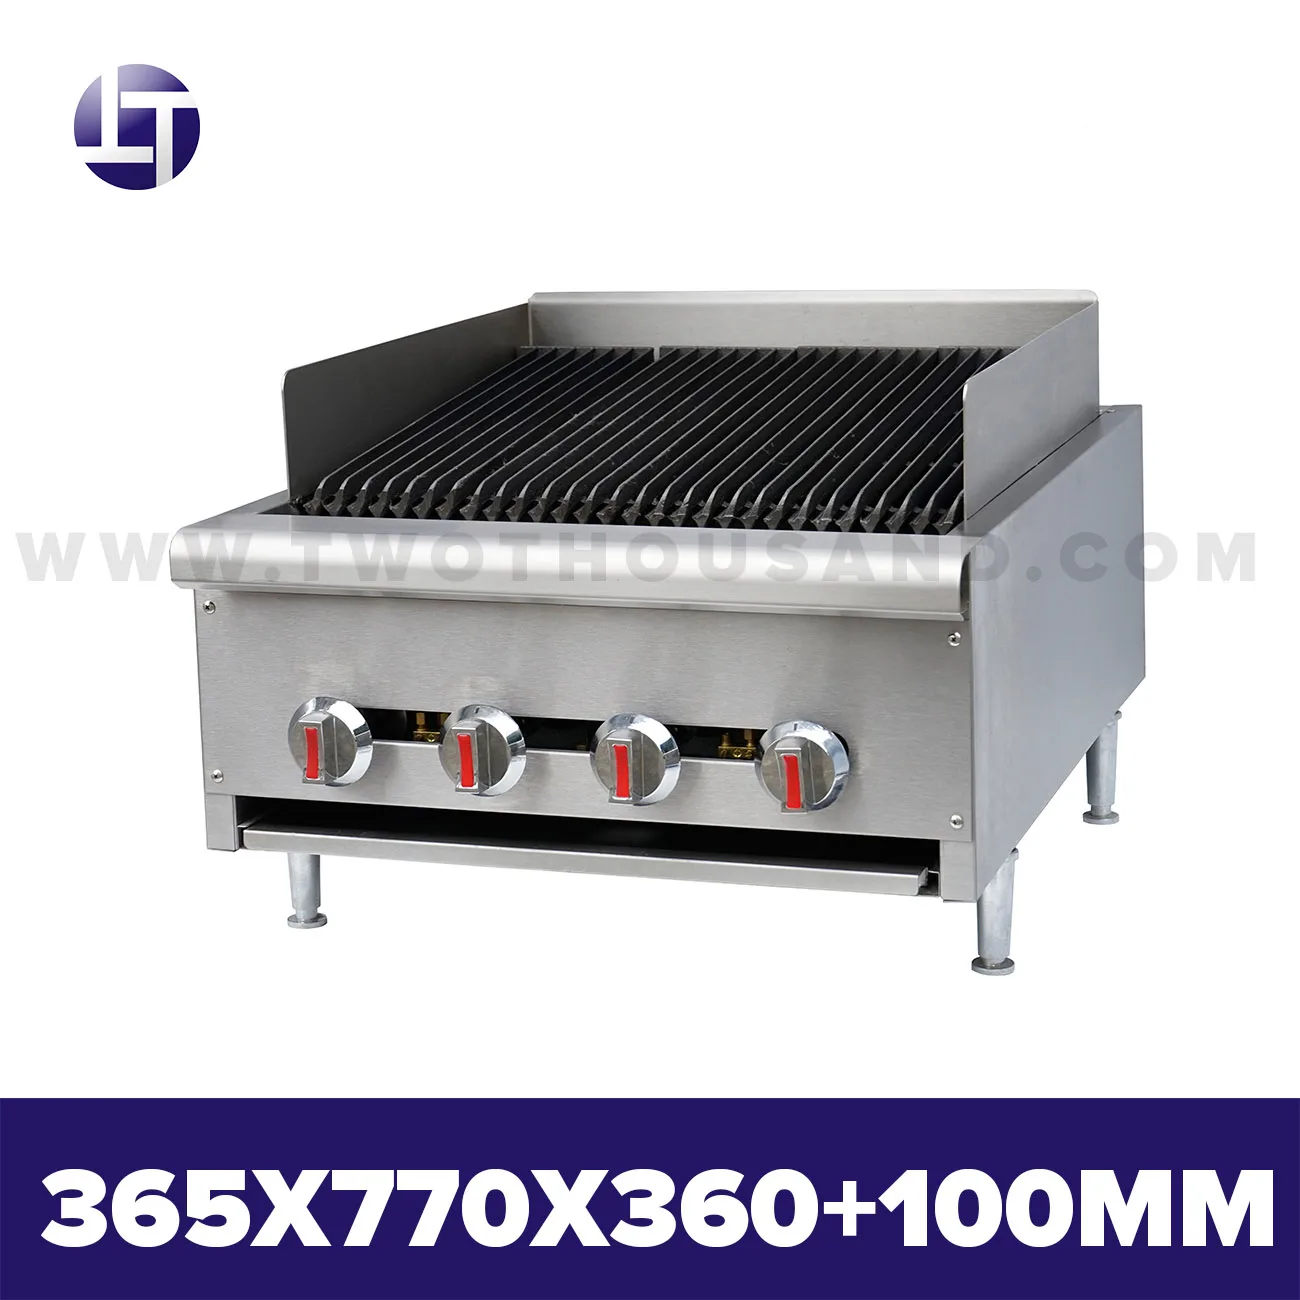 Cb 14 2 Burners Etl Commercial Countertop Gas Barbecue Char Grill